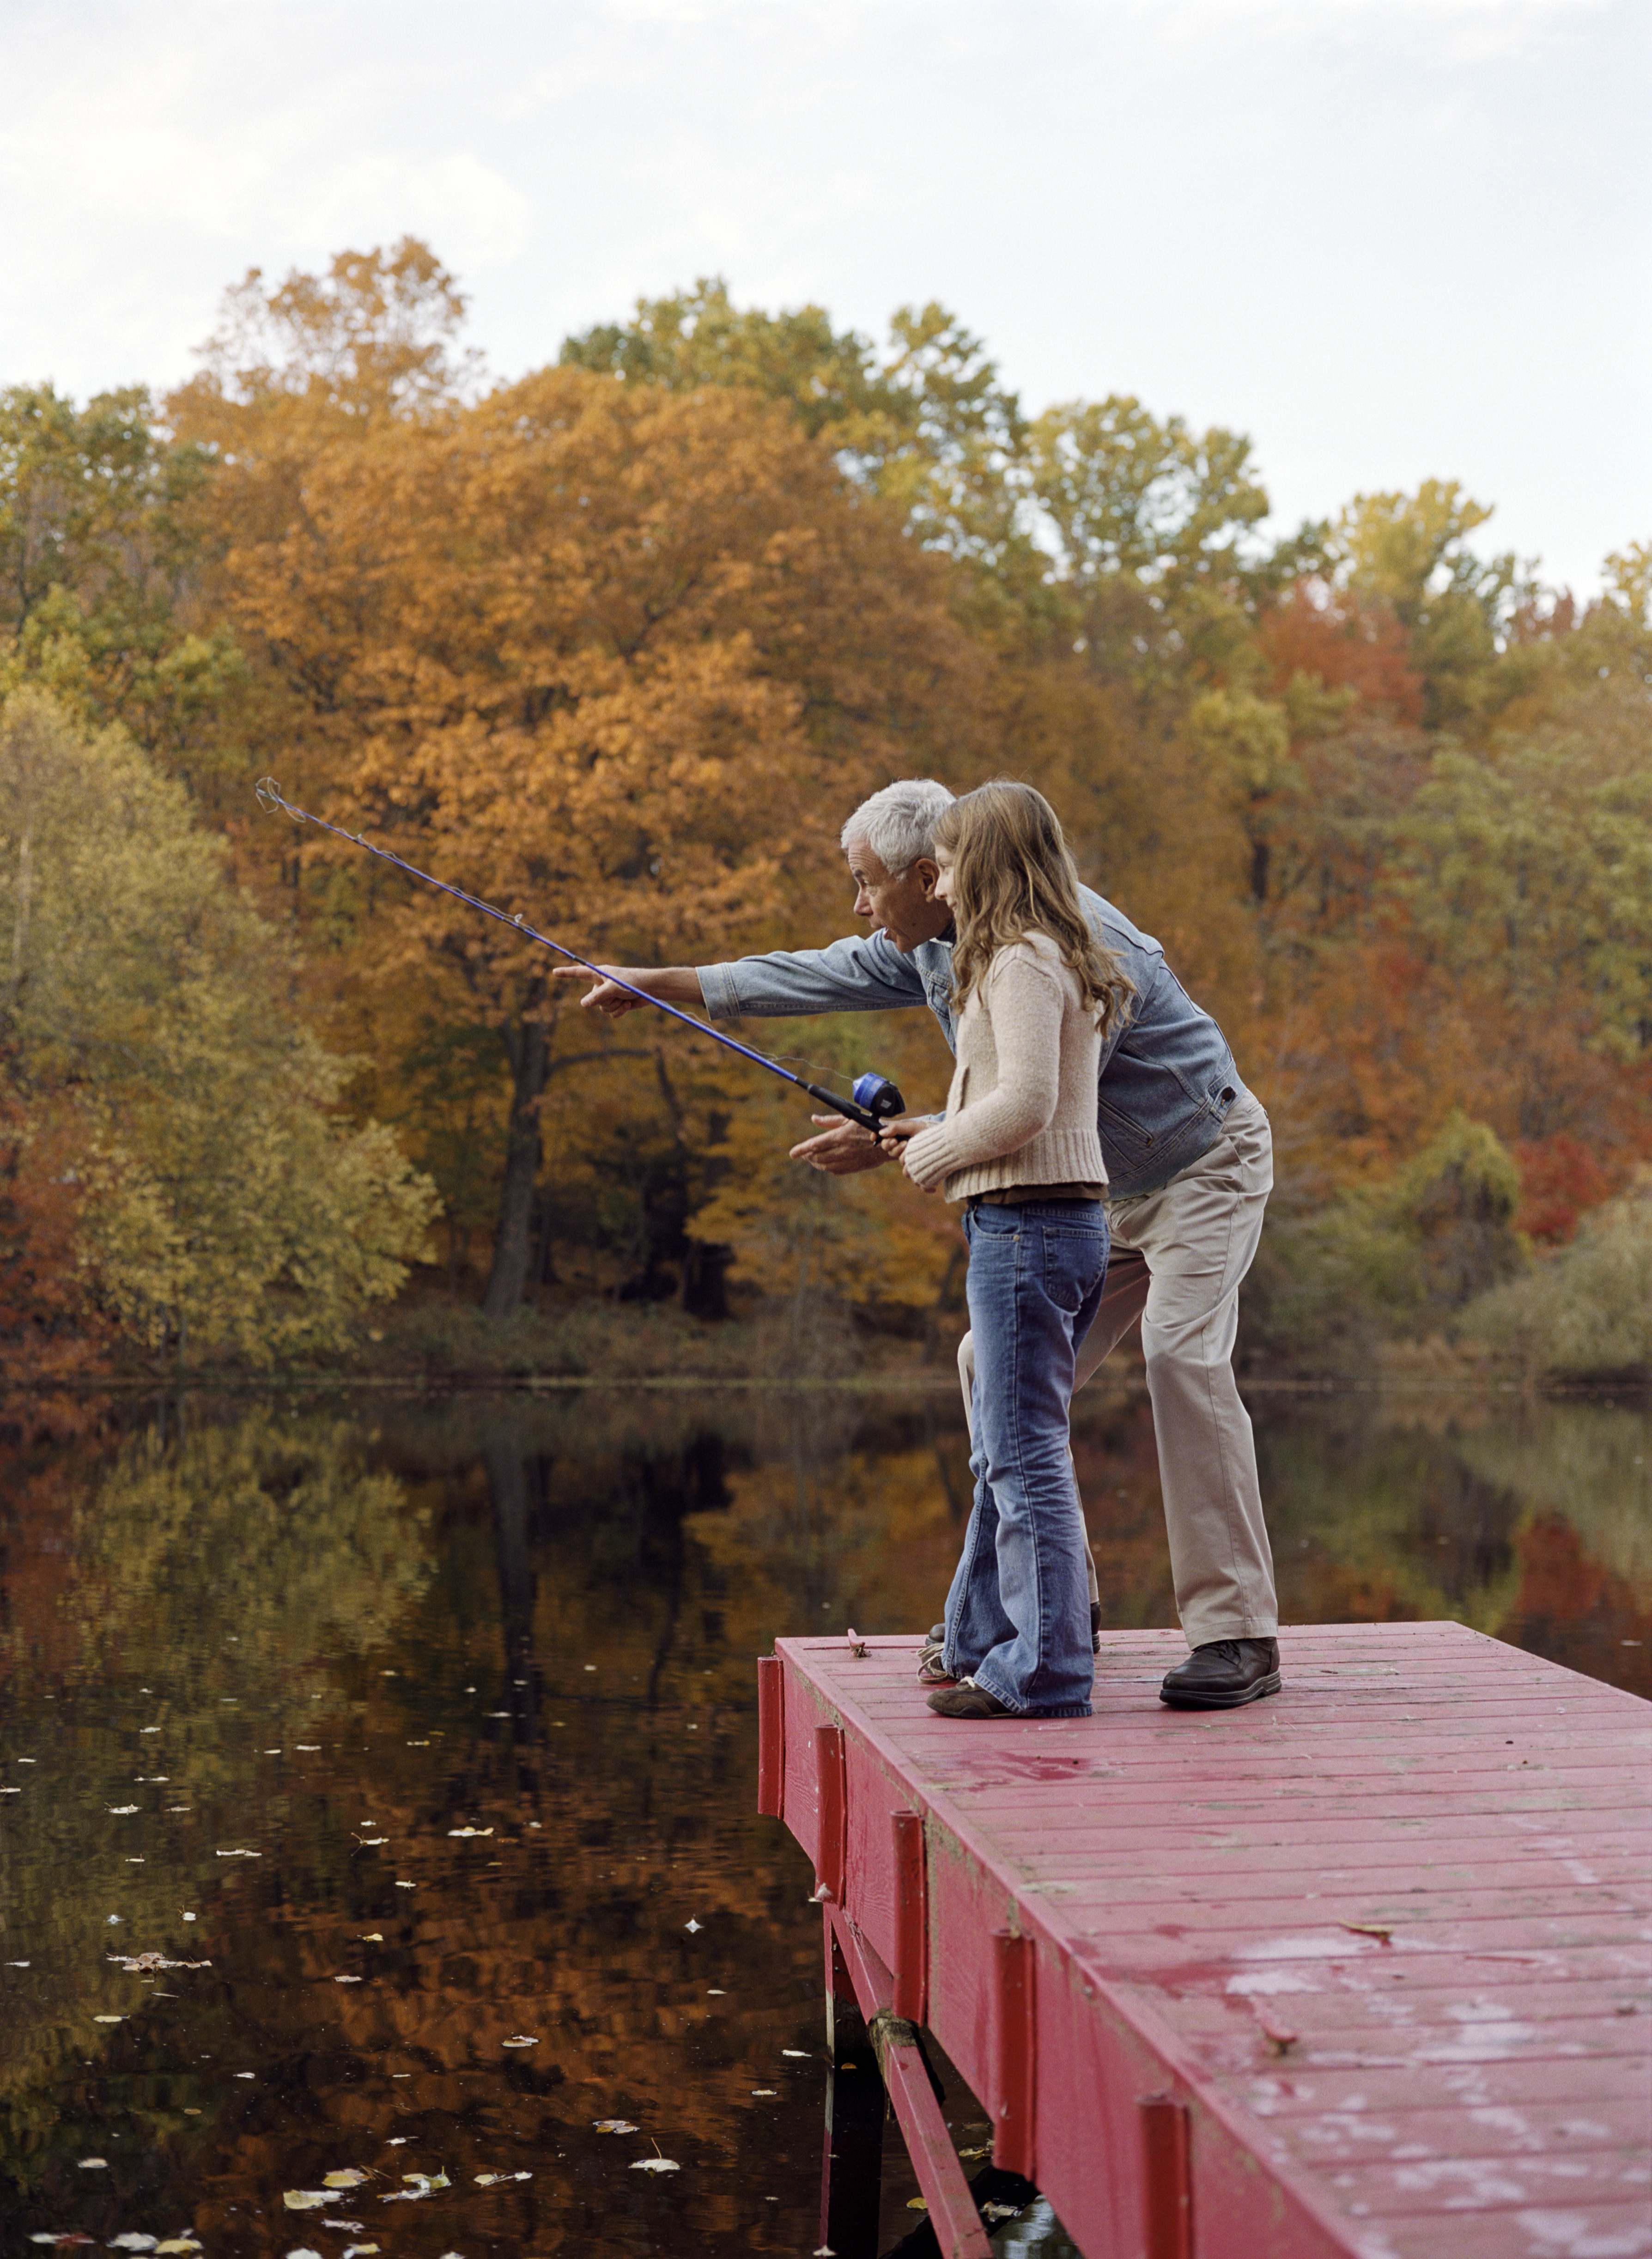 Grandfather and granddaughter (8-10) on dock, girl with fishing rod | Source: Getty Images